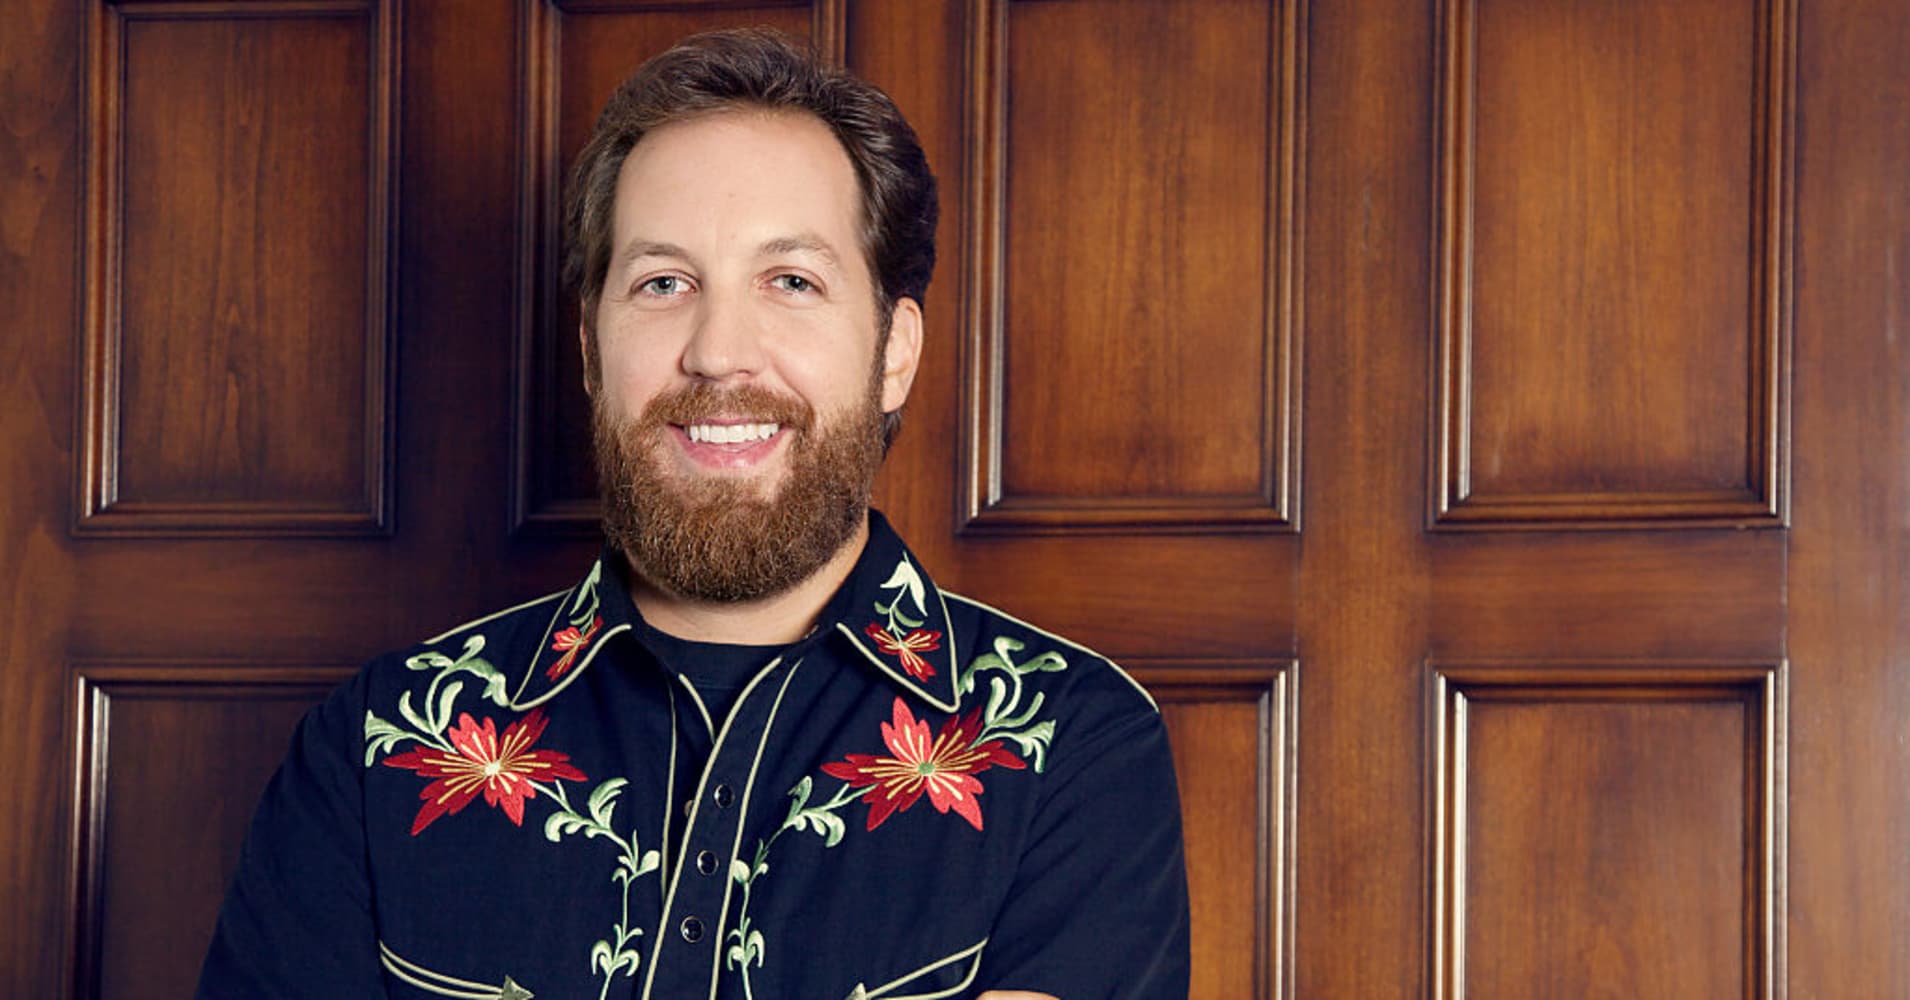 Billionaire Chris Sacca shares his No. 1 money tip for young people